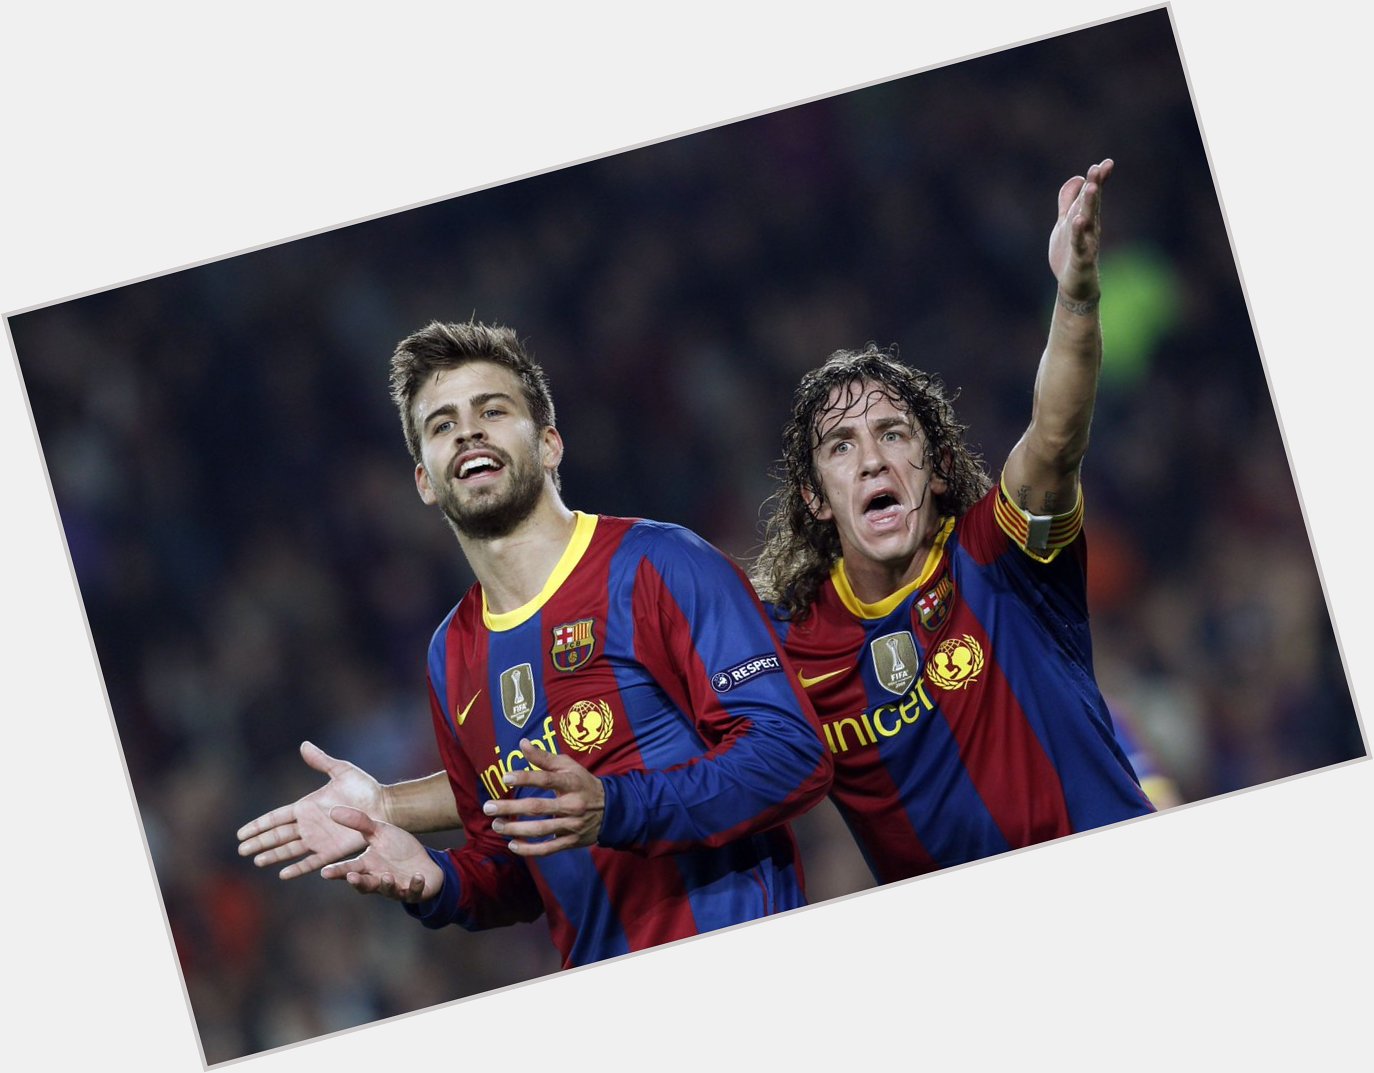  Happy Birthday Gerard Piqué

Where do these two rank in the all-time best centre-back partnerships? 